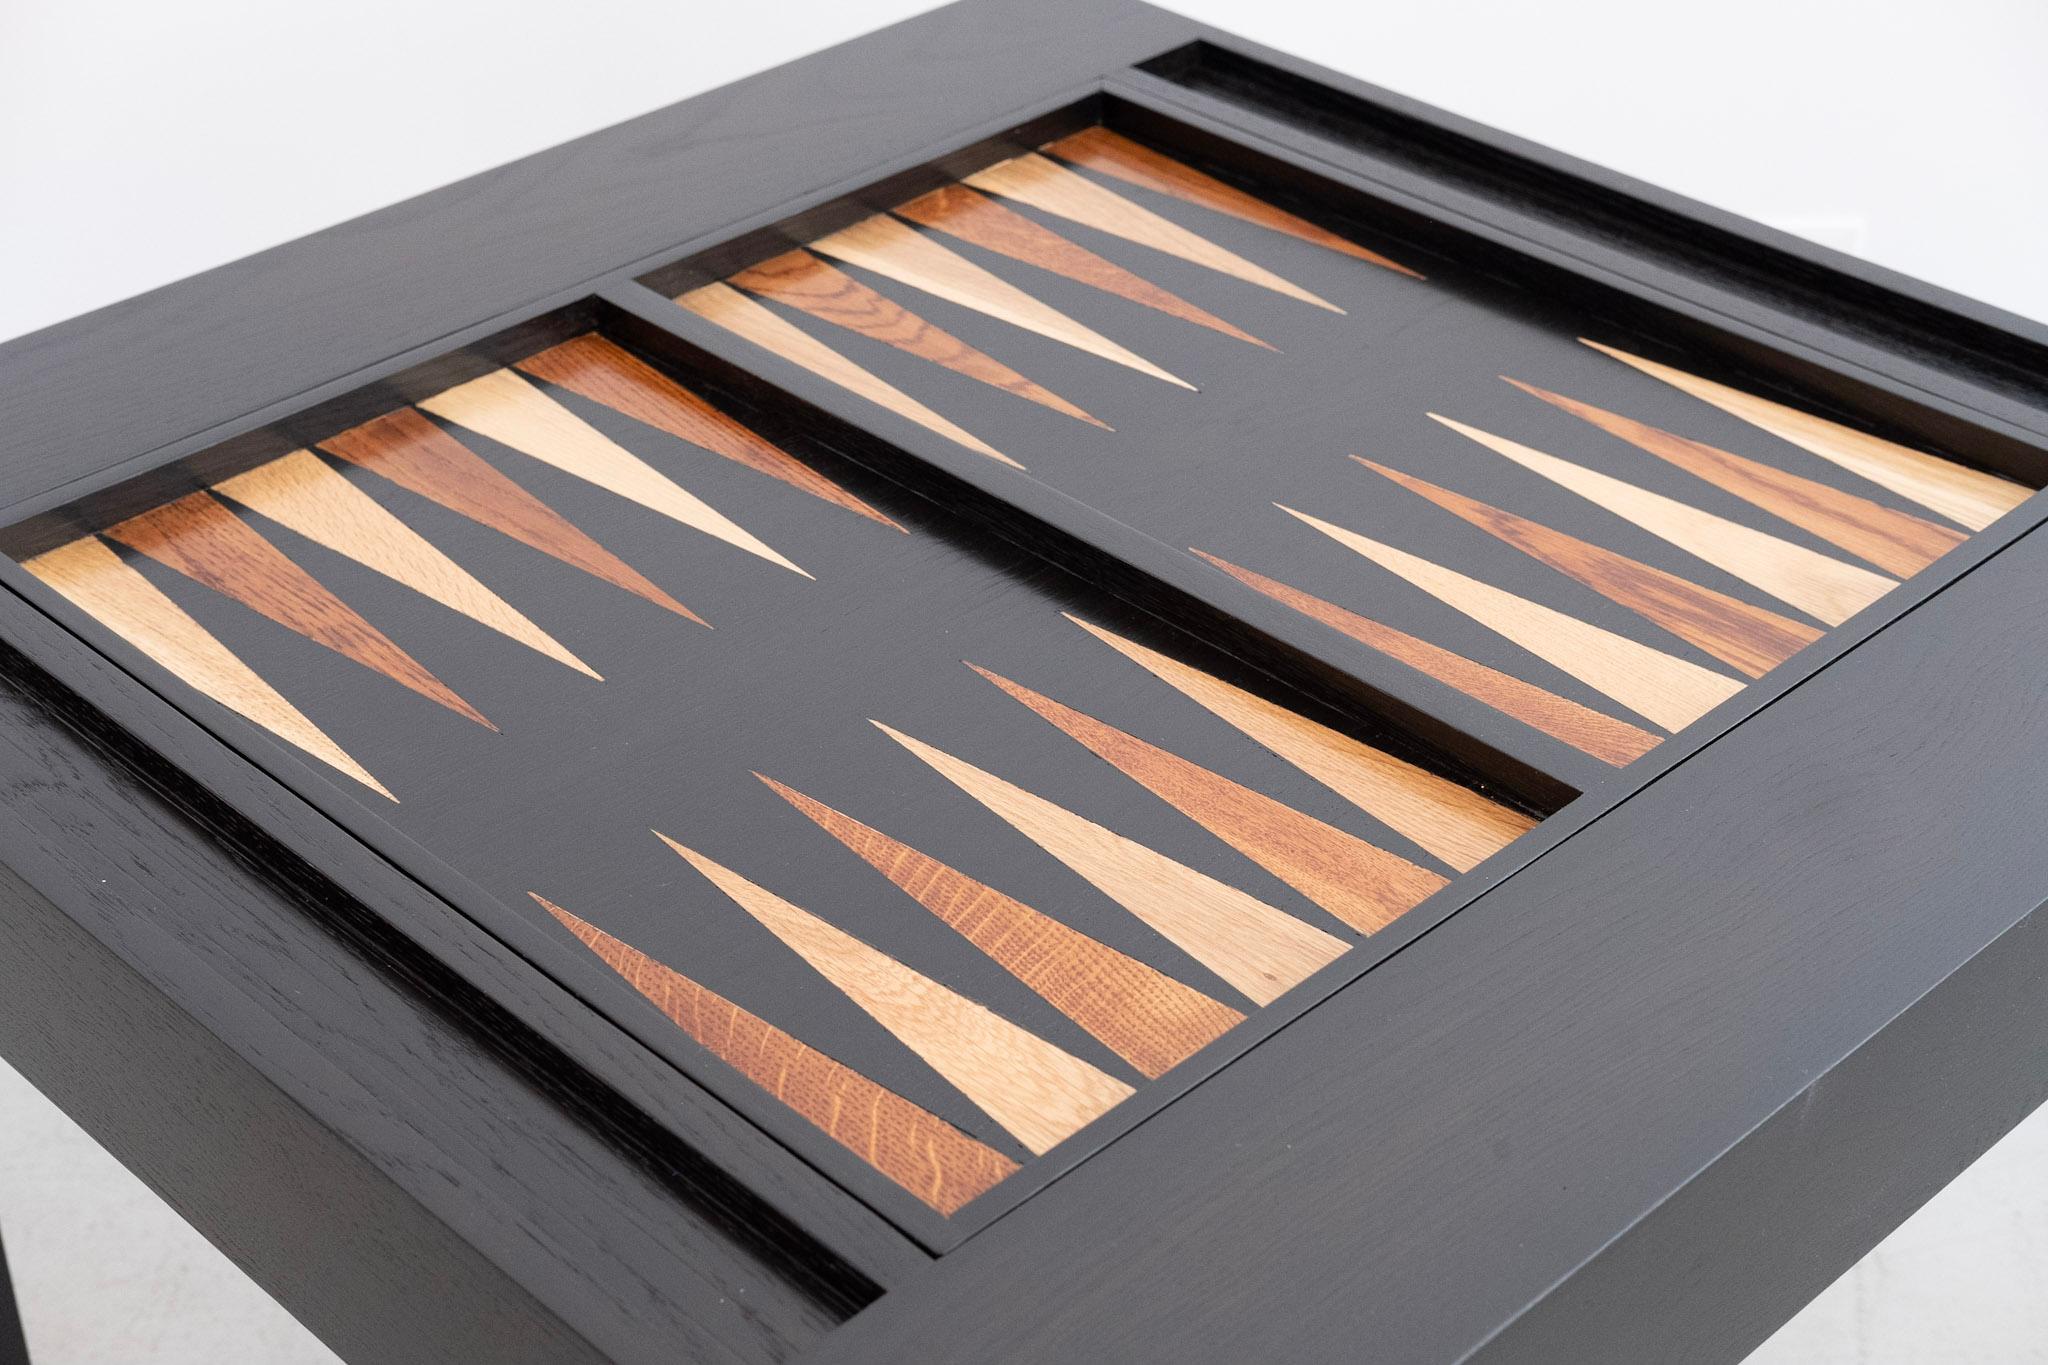 Parson's style backgammon table newly produced in walnut and refinished in ebony. The game board features hand inlaid mahogany and beech wood. Playing surface flips to reveal a solid walnut tabletop perfect for board or card games. Custom finishes